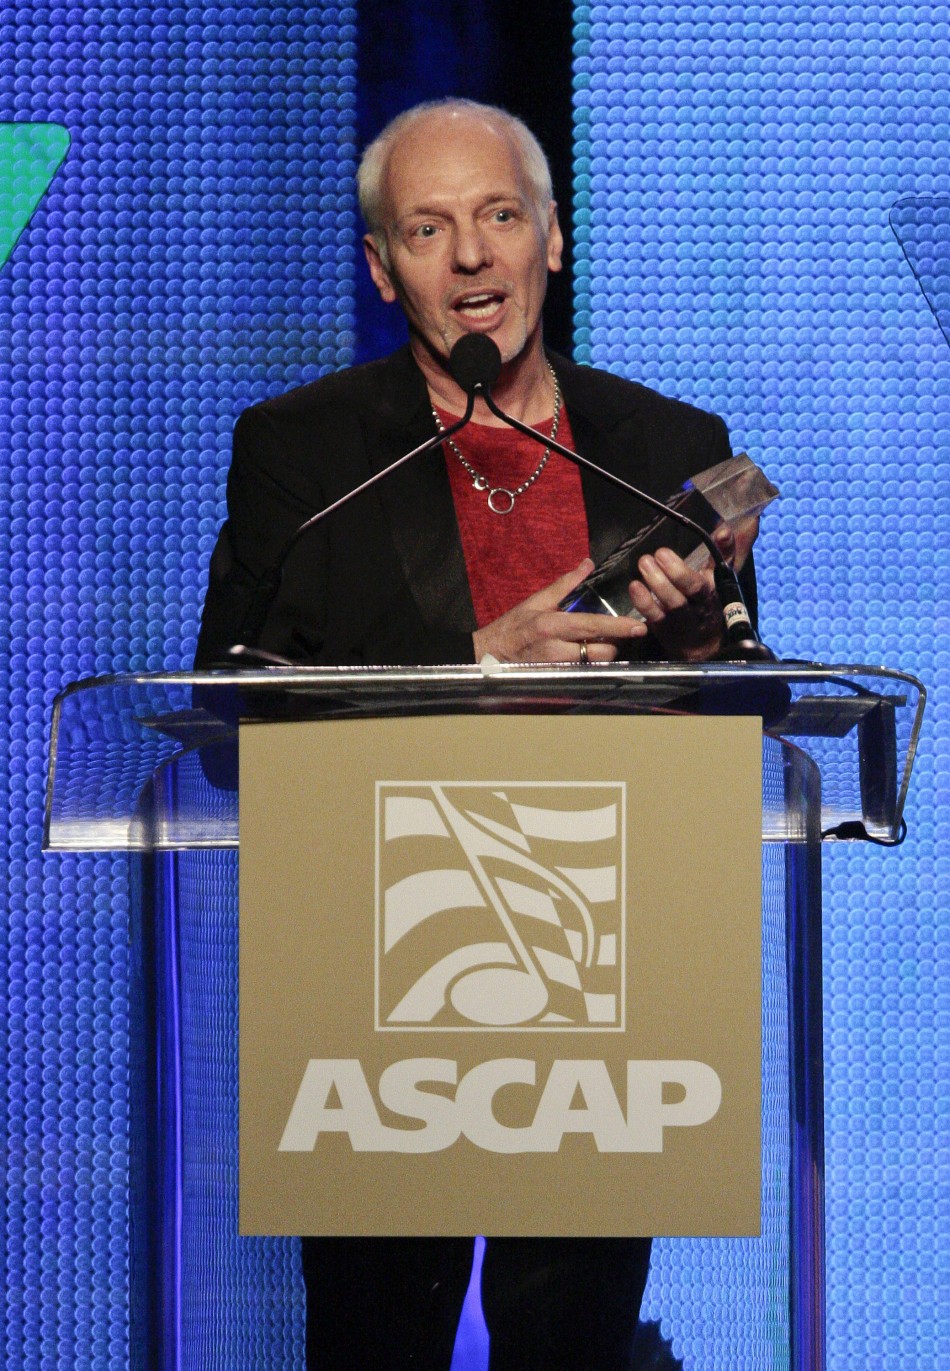 Musician Peter Frampton accepts the Global Impact Award at the 29th Annual ASCAP Pop Music Awards in Hollywood, California